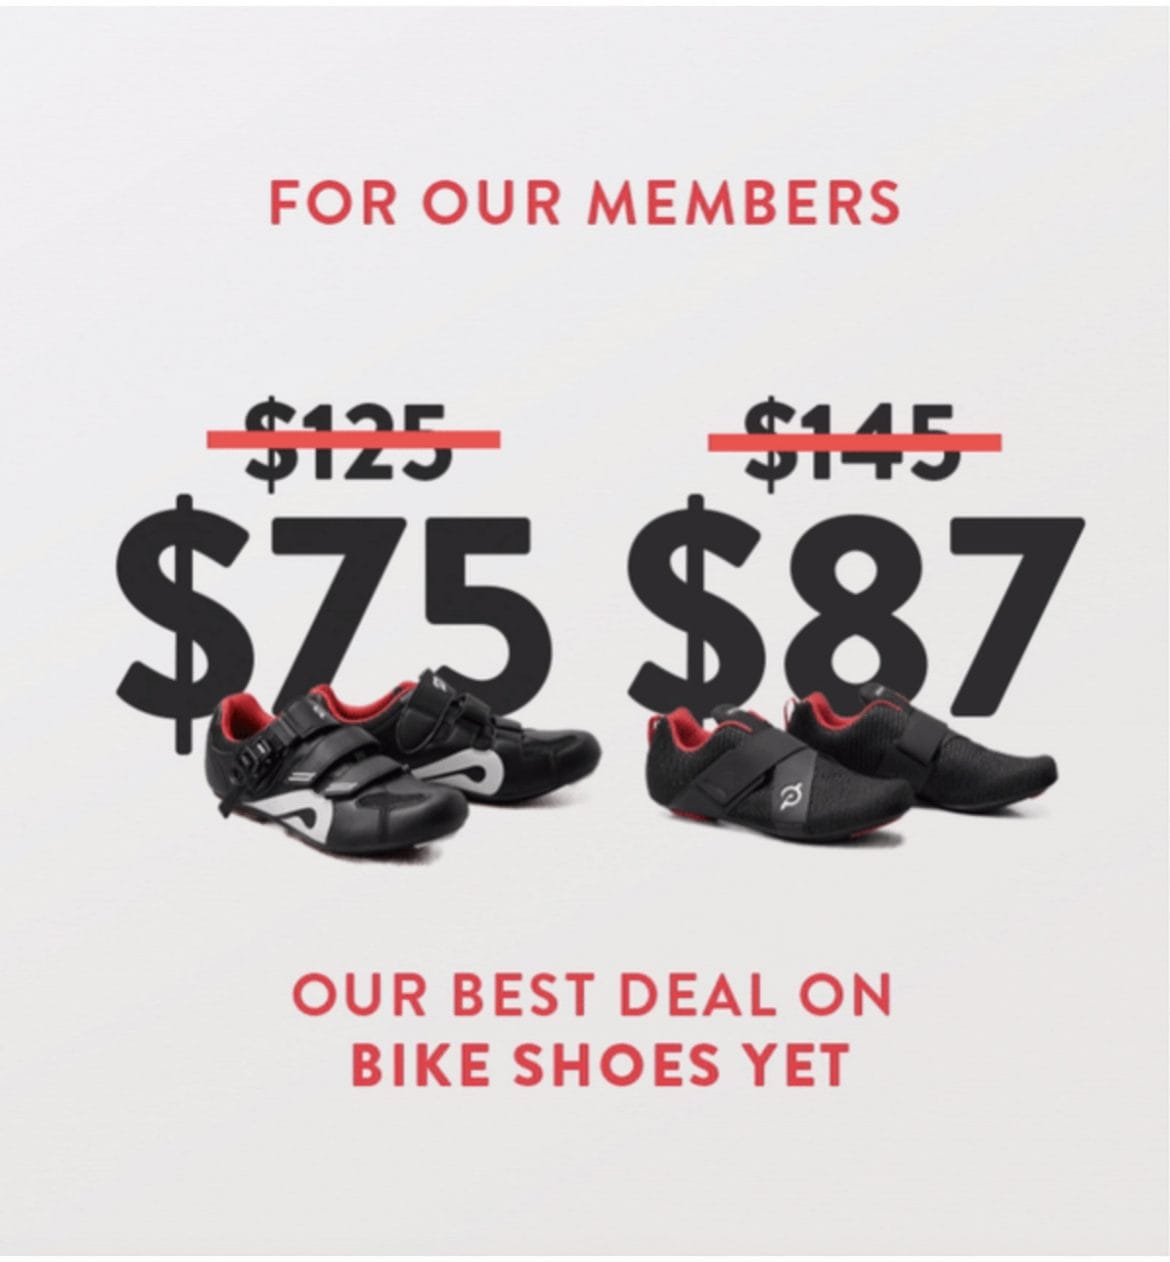 Discounted Peloton Apparel Available from Sierra Online (and in-store at  Sierra, Marshalls, and TJ Maxx) - Peloton Buddy